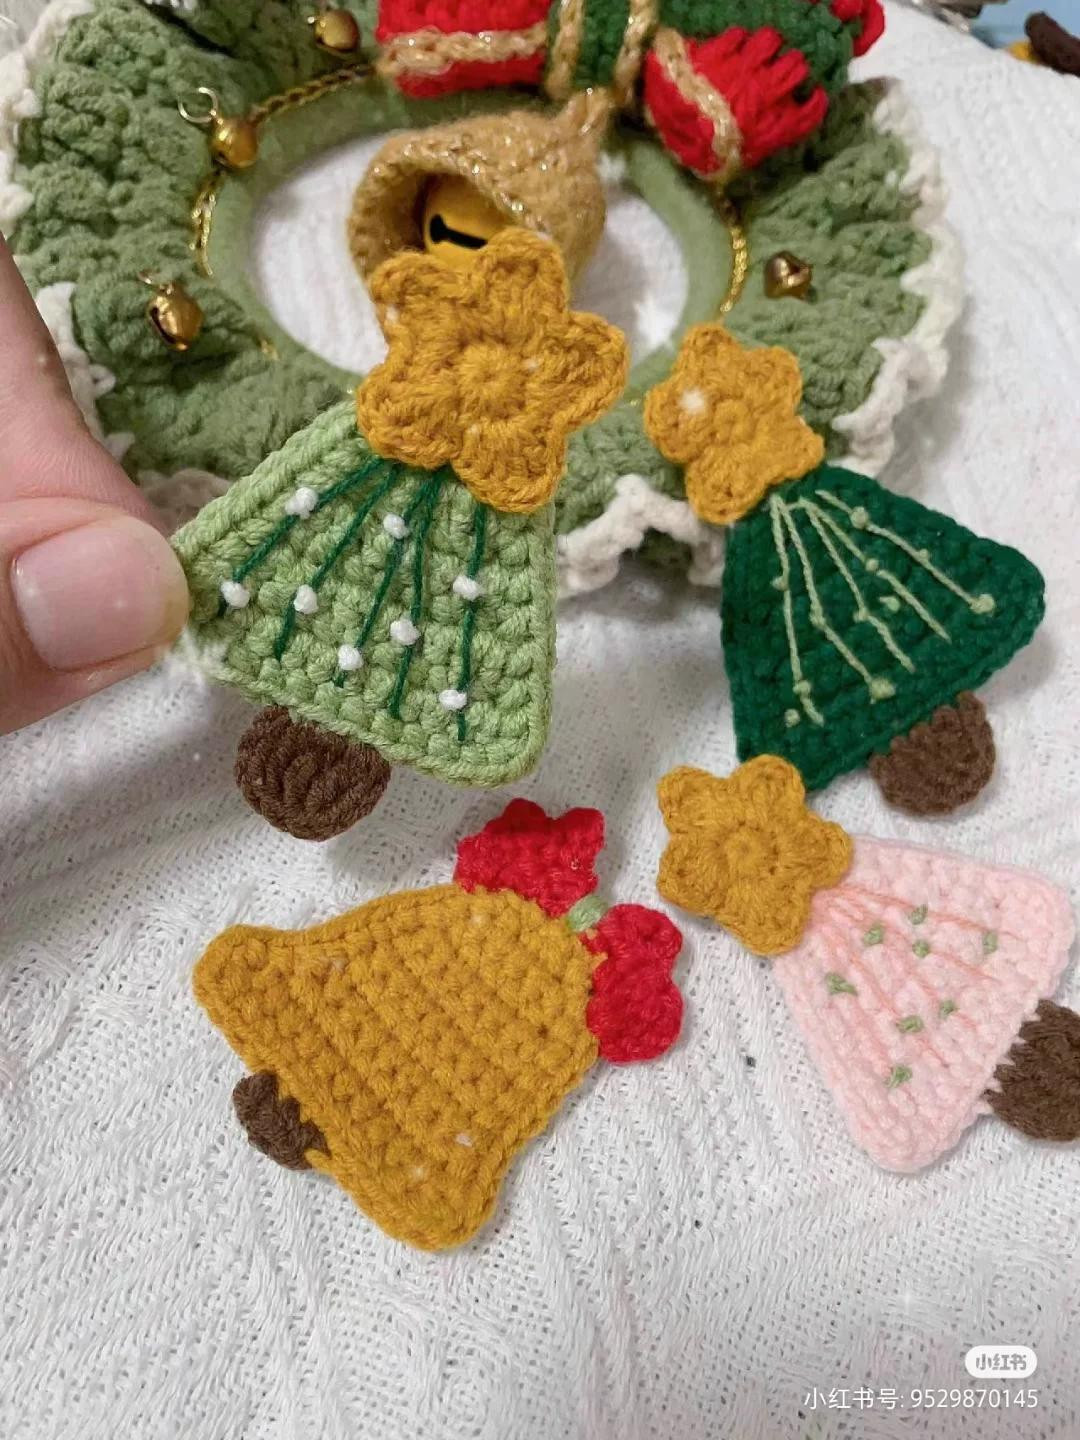 Christmas tree and bell crochet pattern.